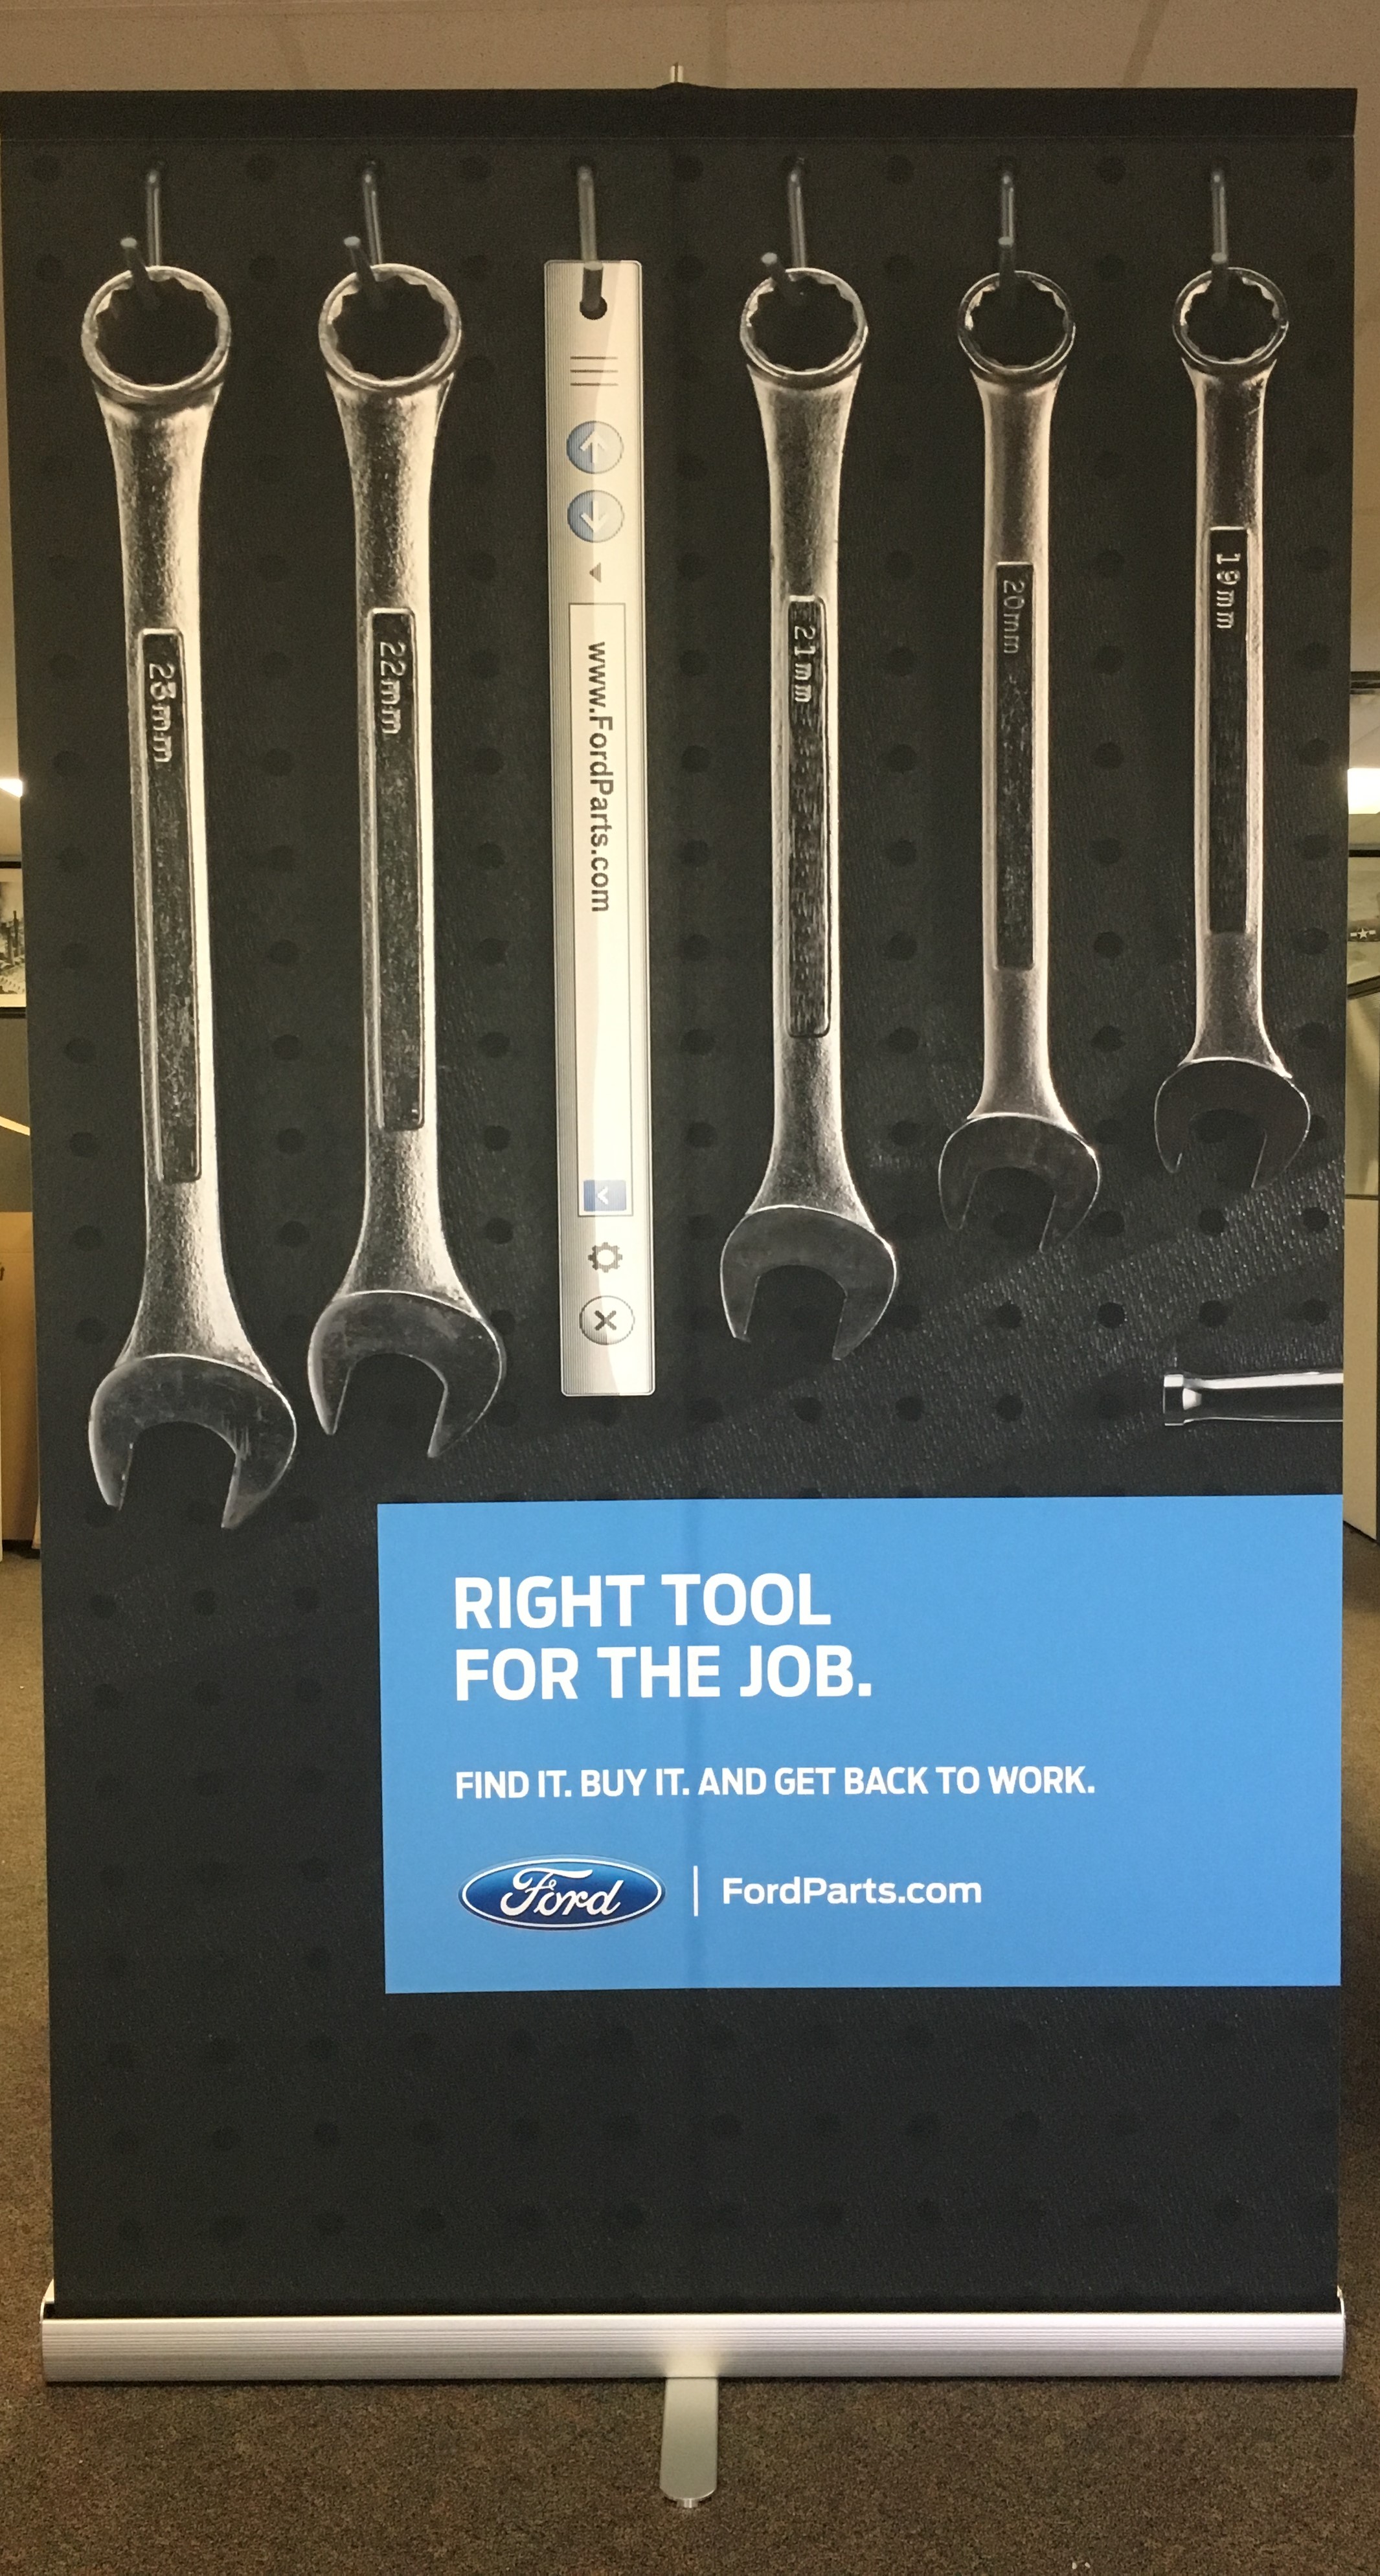 FordParts.com Pull Up Banner